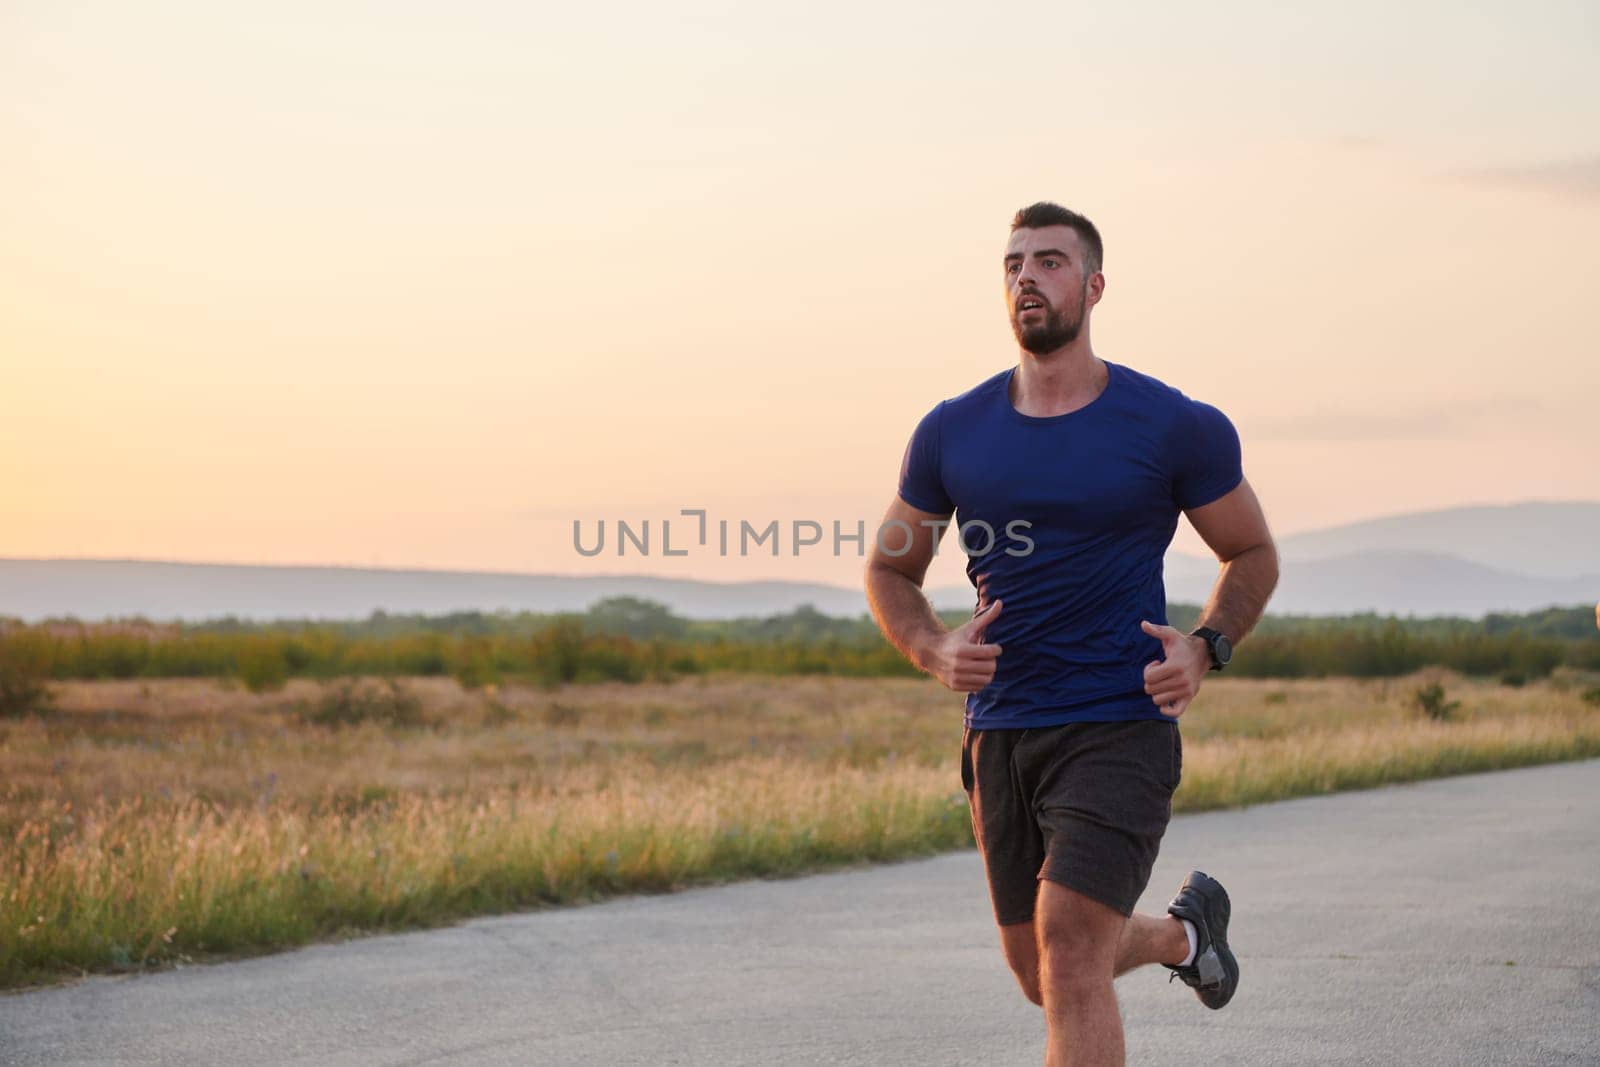 A dedicated marathon runner pushes himself to the limit in training. by dotshock